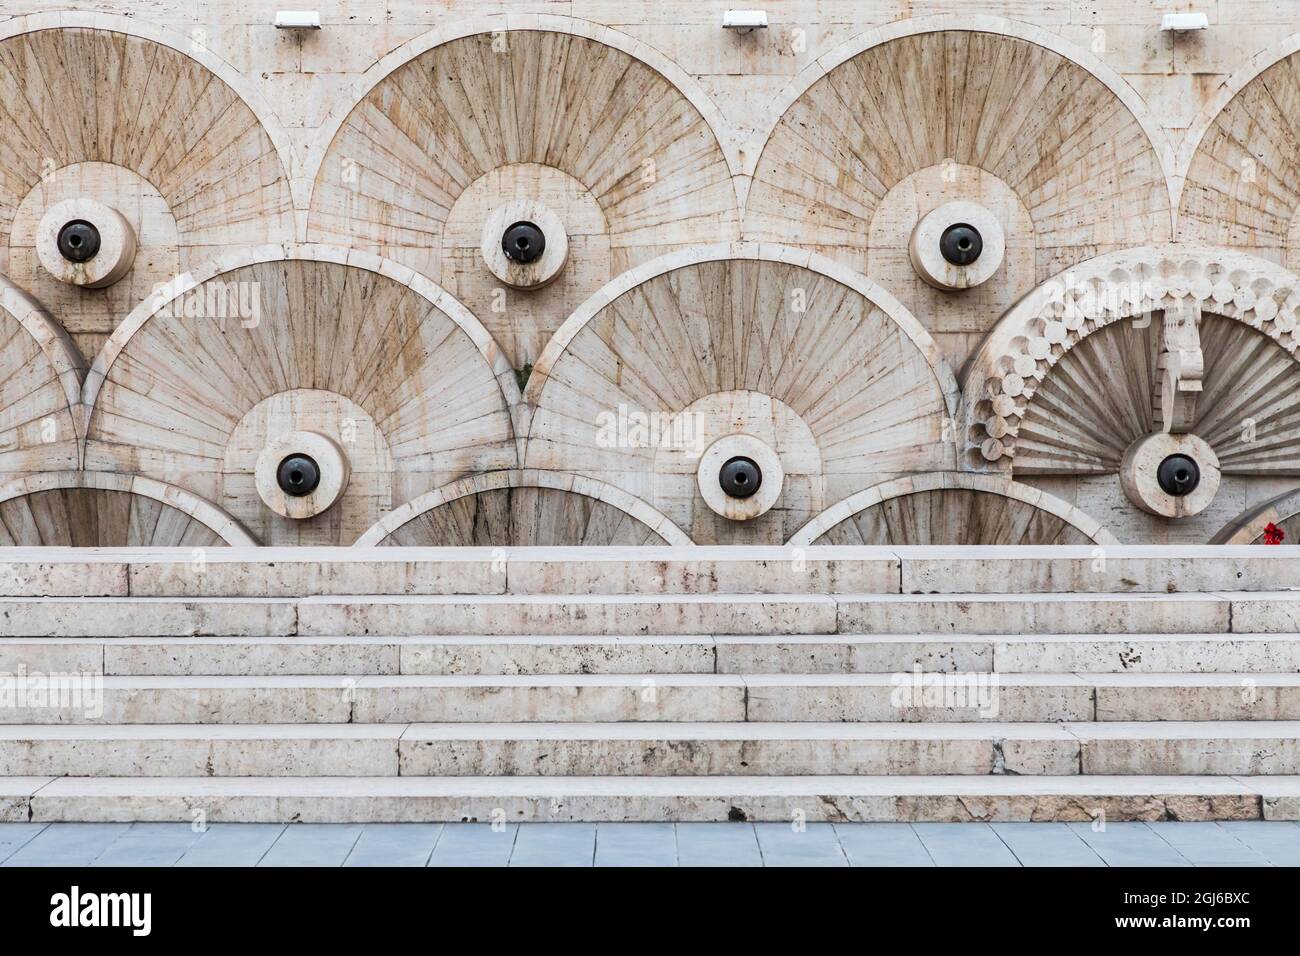 Armenia. Yerevan. Cafesjian Center for the Arts, exterior decorative elements at the Cascade Complex. (Editorial Use Only) Stock Photo